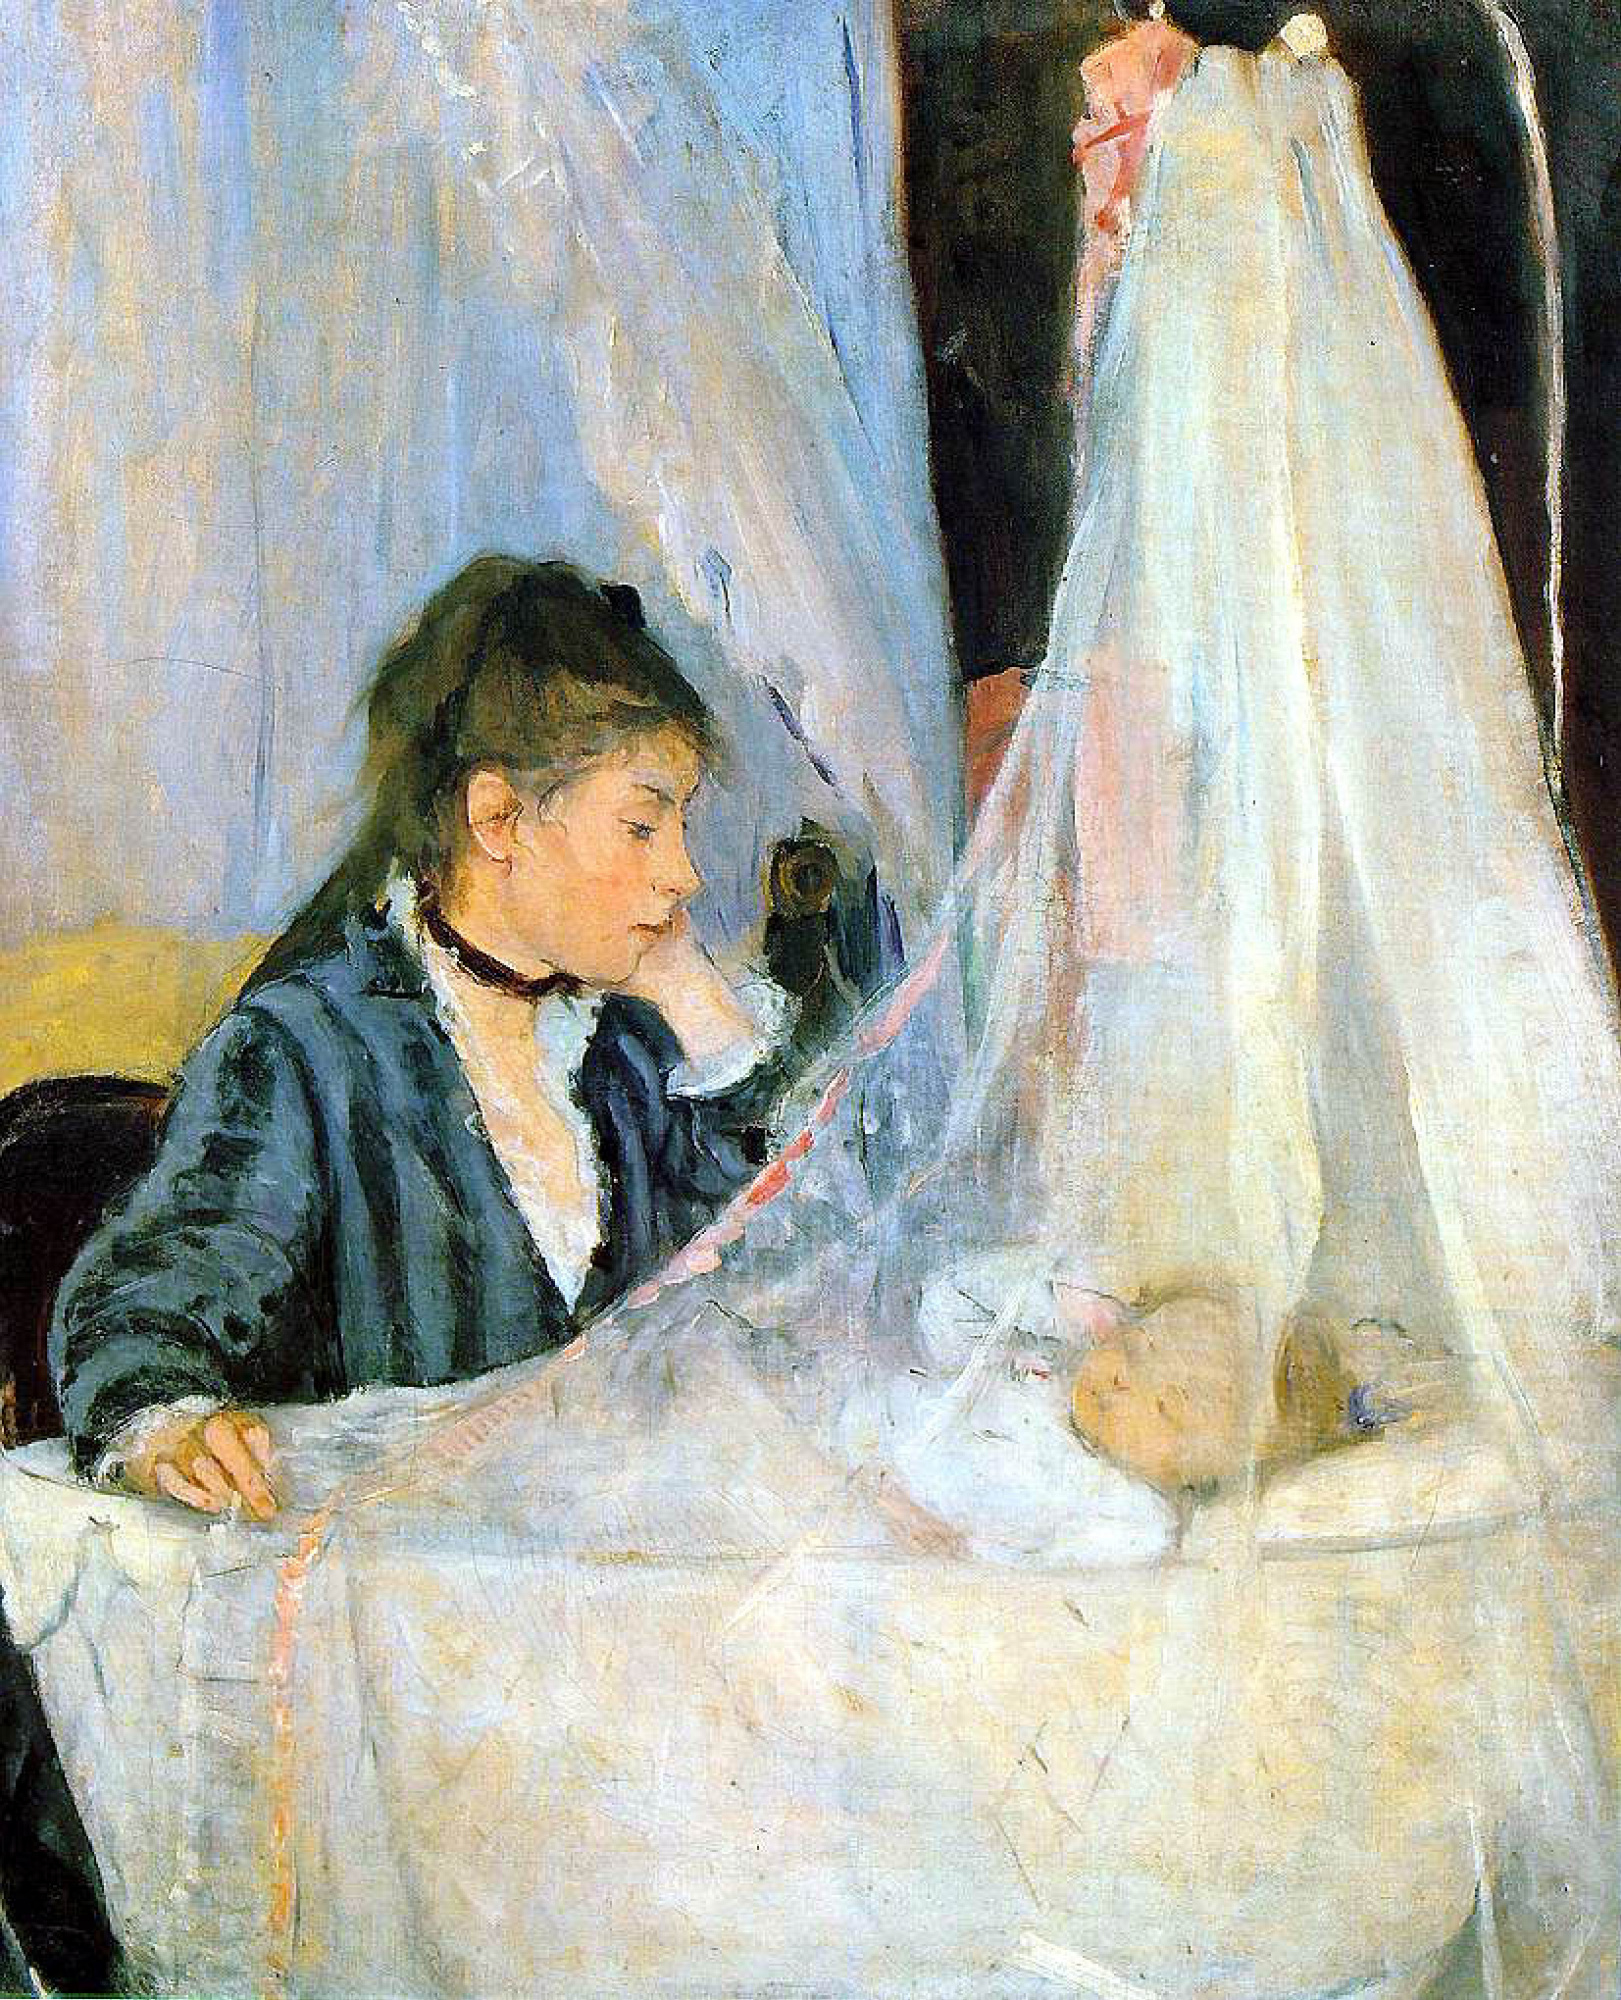 The Cradle by Berthe Morisot